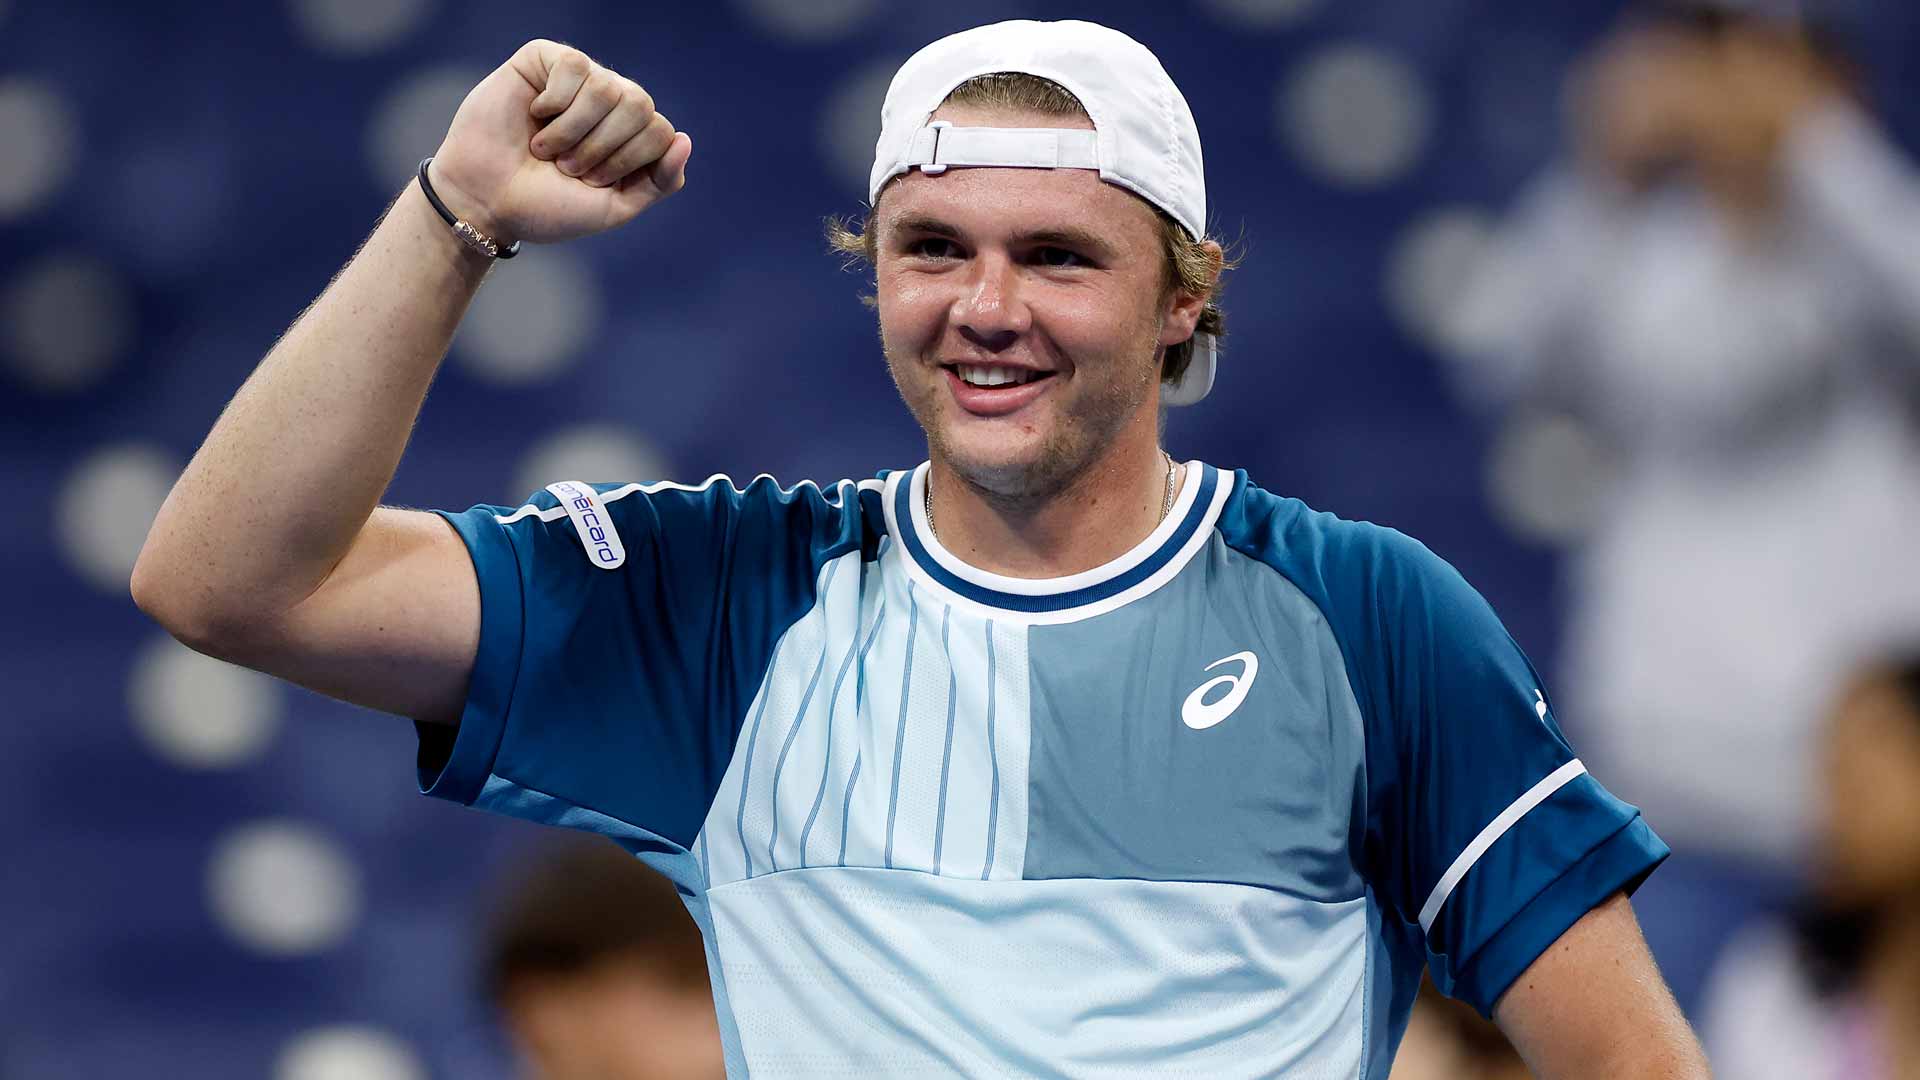 Dominic Stricker reached the fourth round of the US Open.